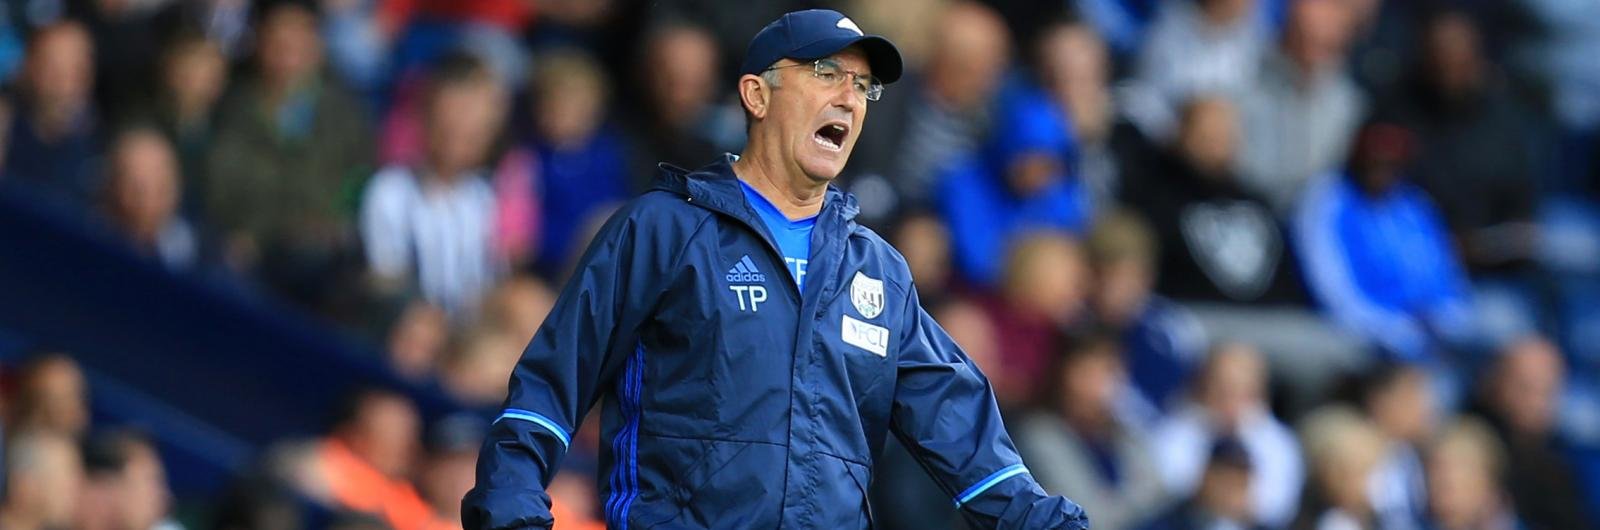 Tony Pulis – Should he stay, or leave West Brom?